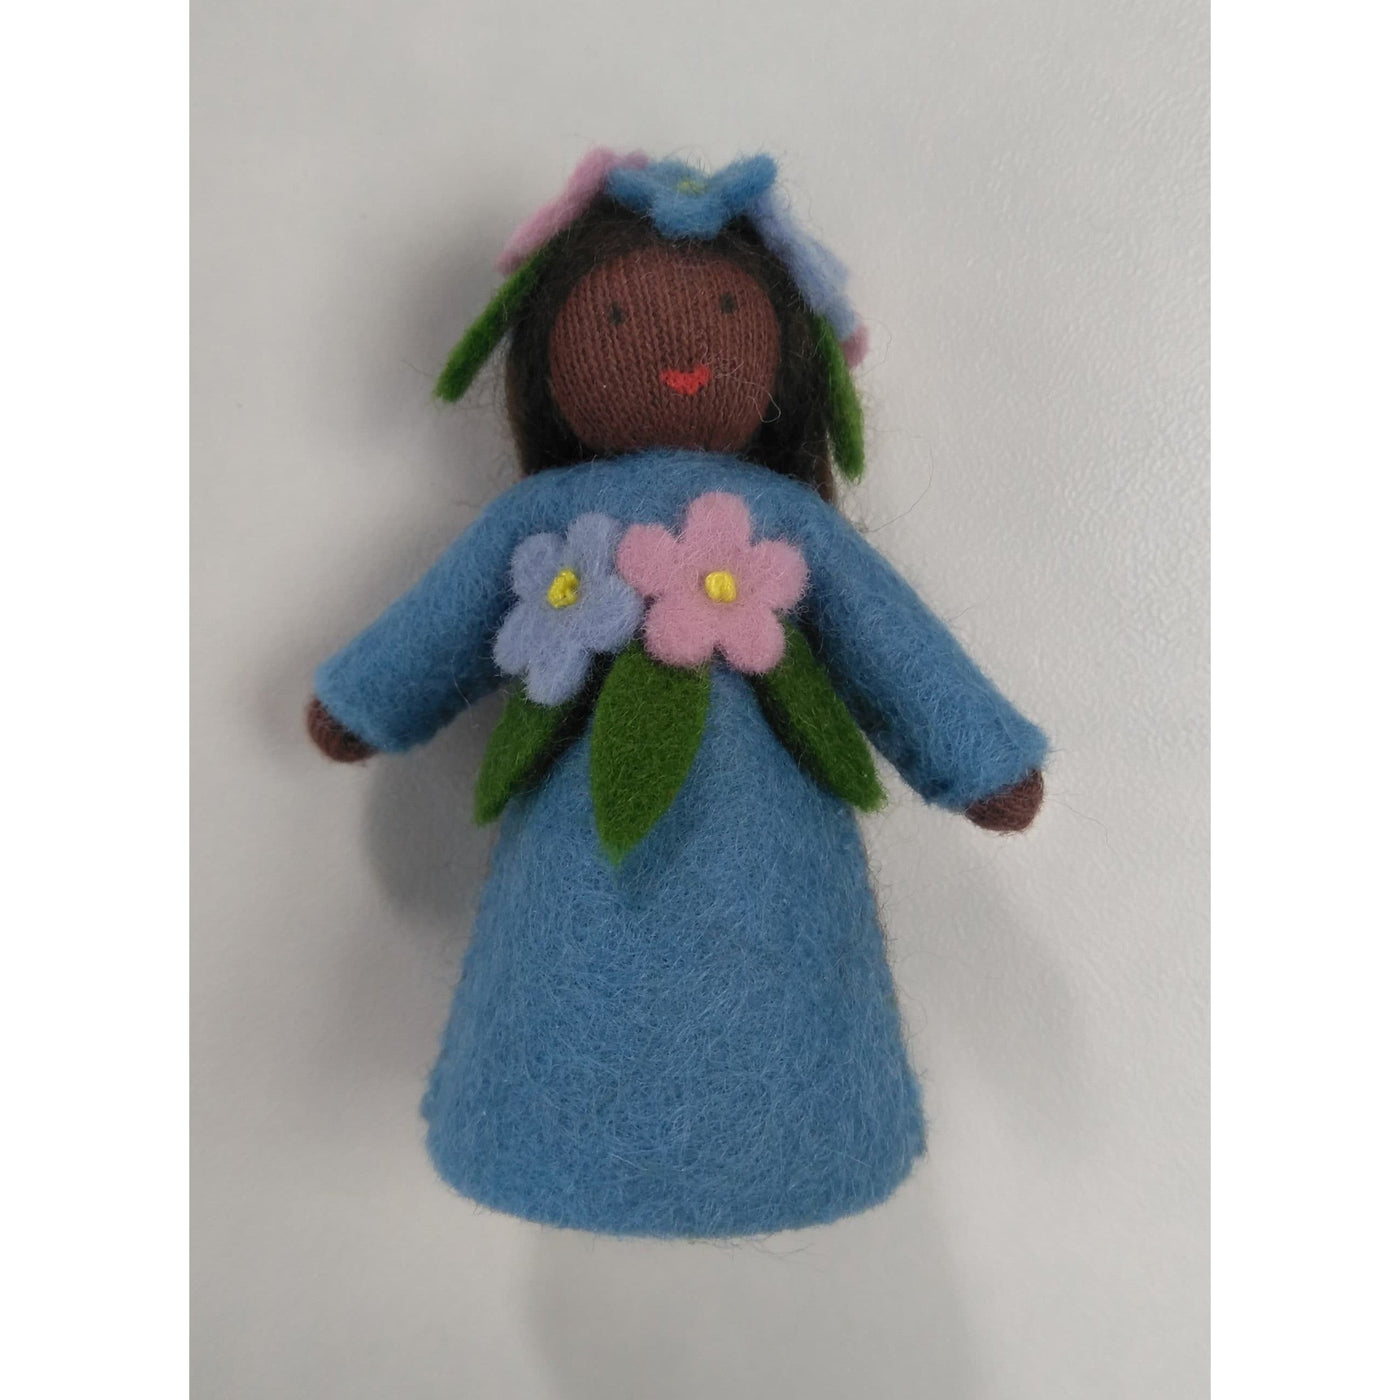 Forget-Me-Not Doll with Flower on Head